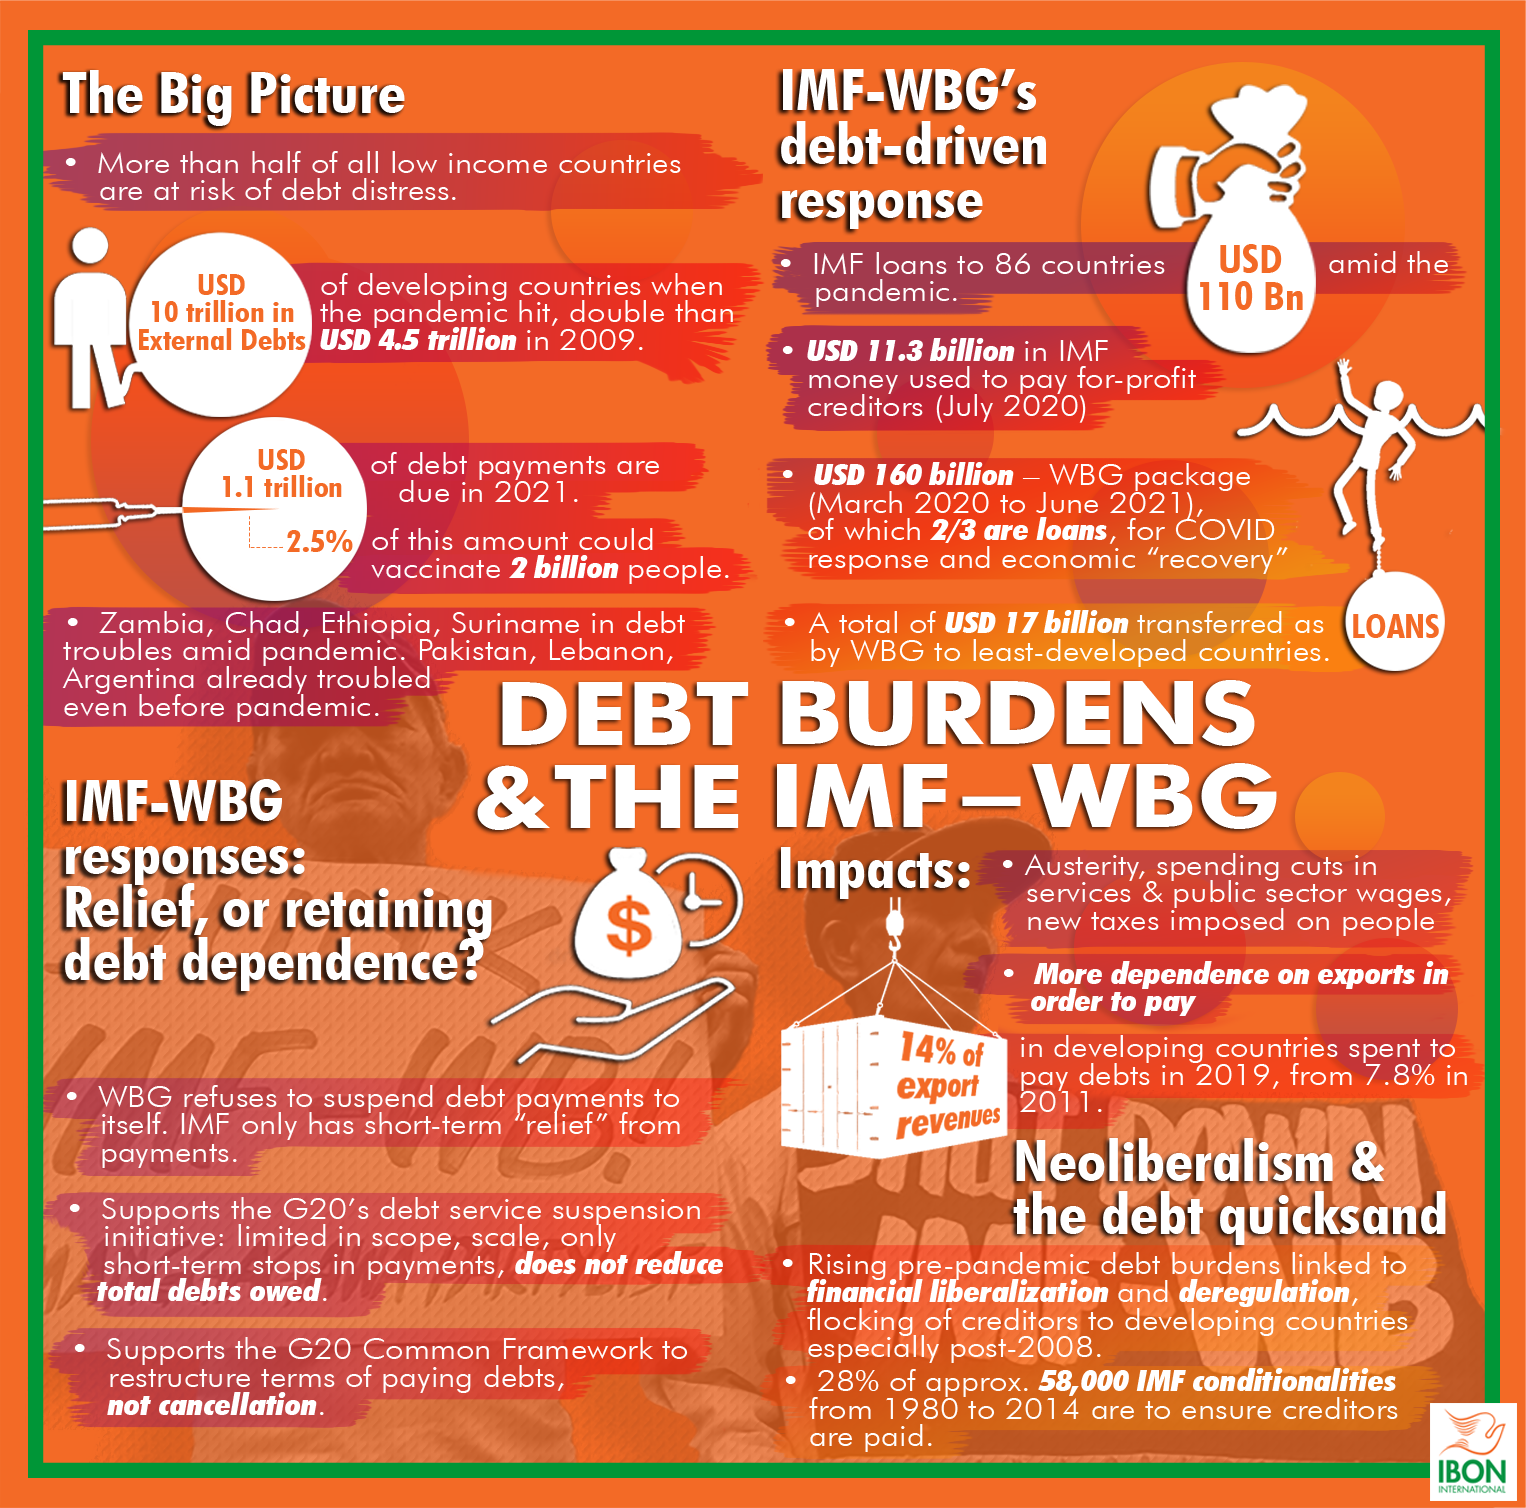 [INFOGRAPHIC] Debt burdens and the IMF, World Bank